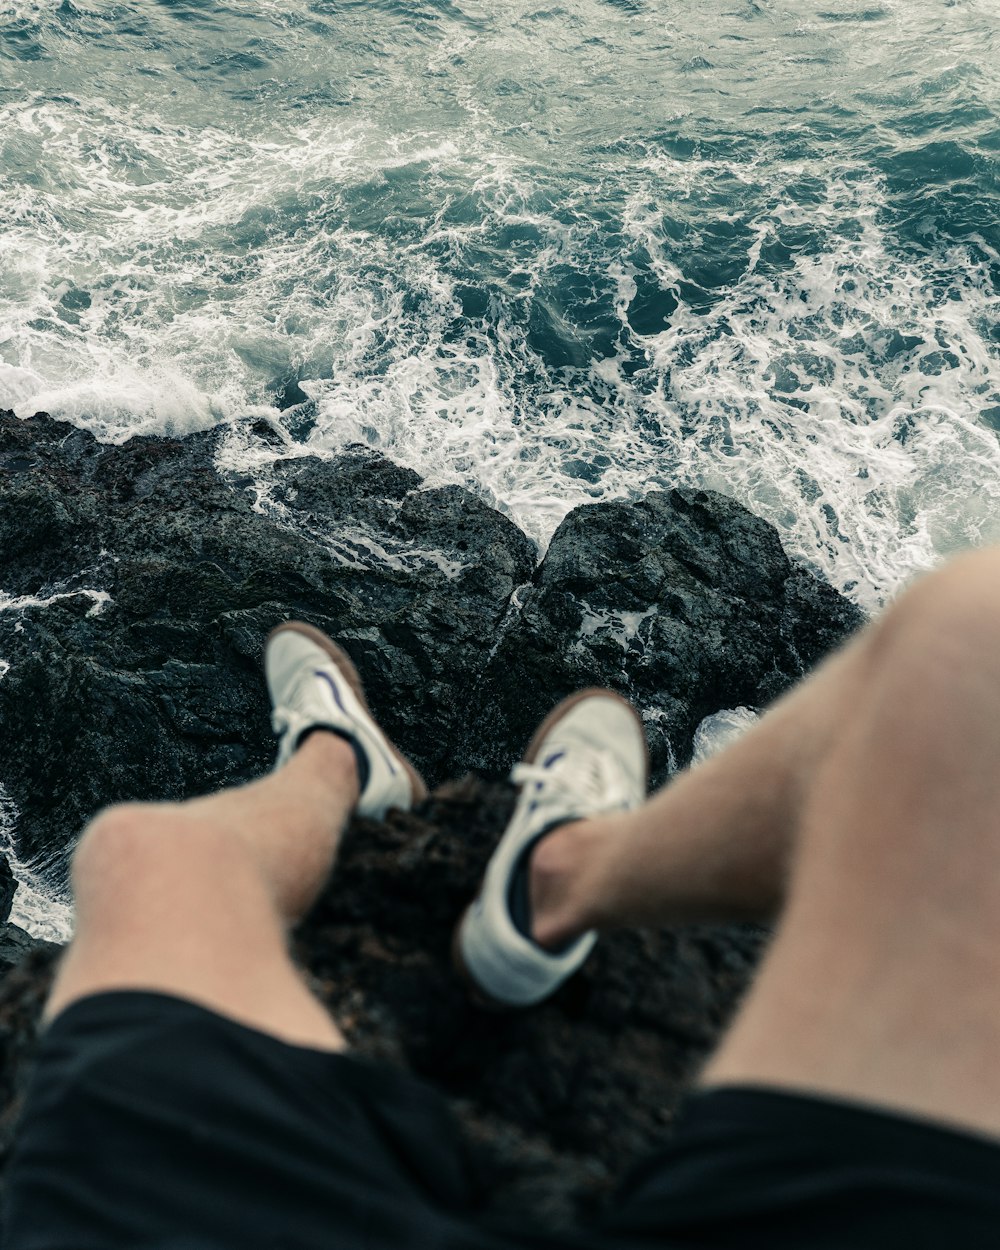 person in black shorts and white sneakers sitting on rock near body of water during daytime